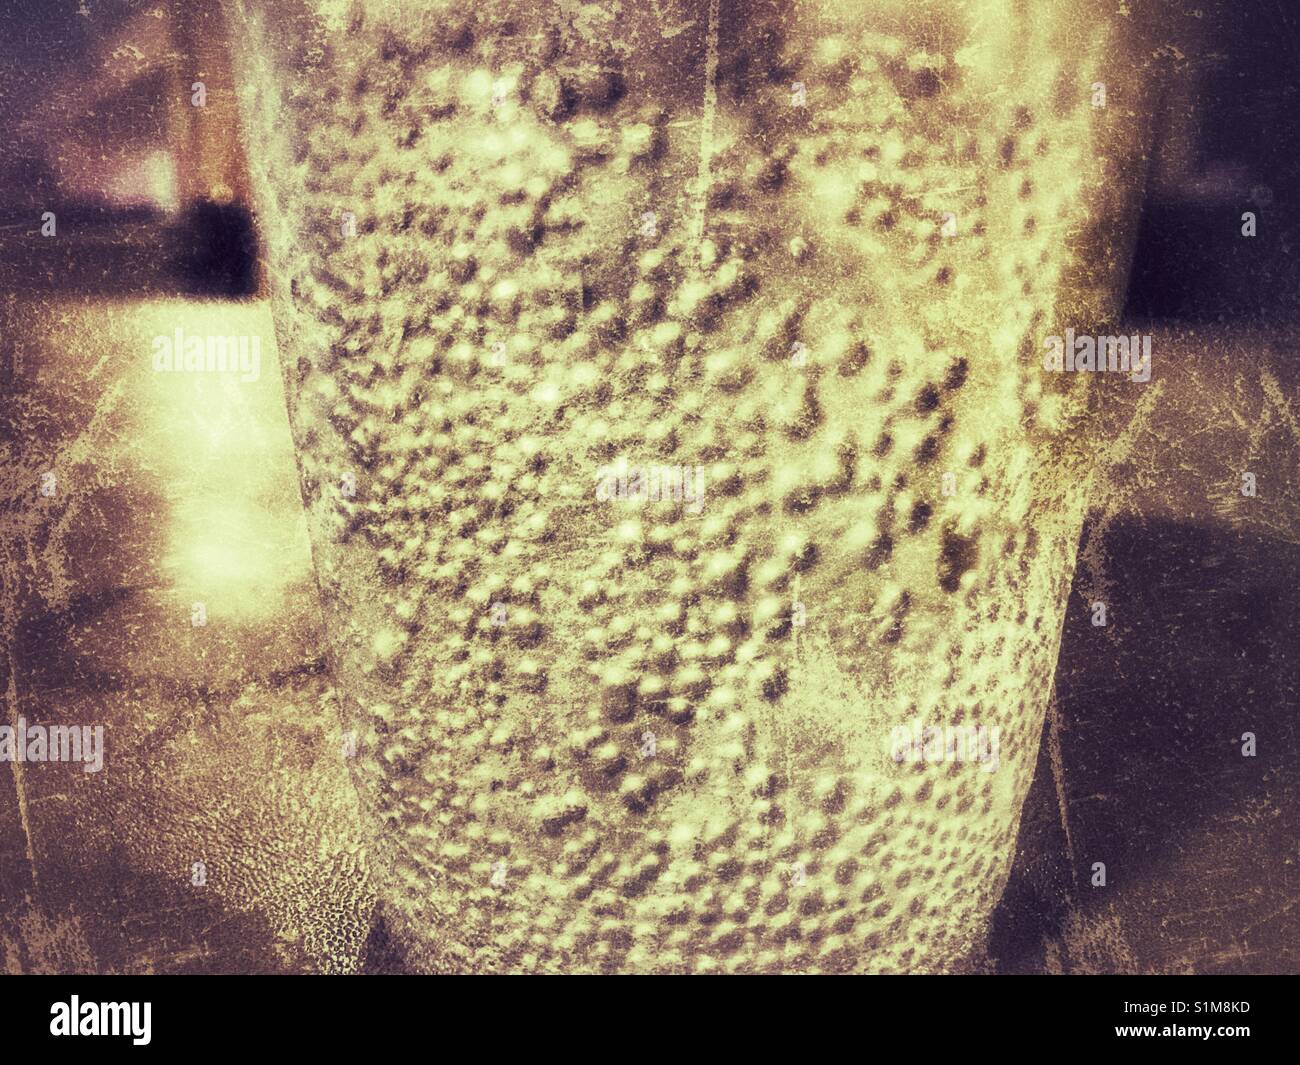 Bubbles in iced soda drink cup Stock Photo